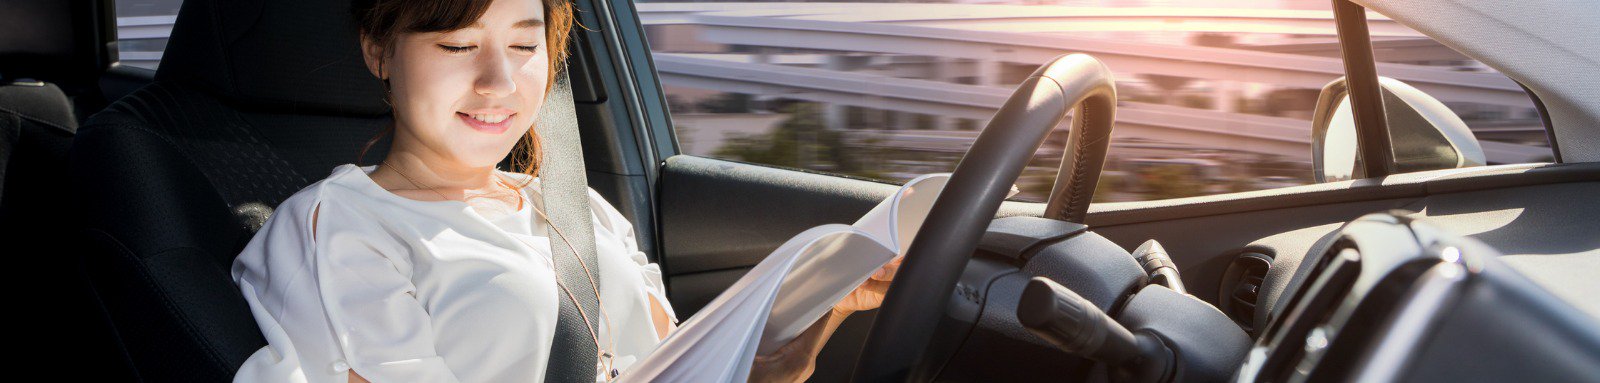 Young woman reading a magazine in self driving car